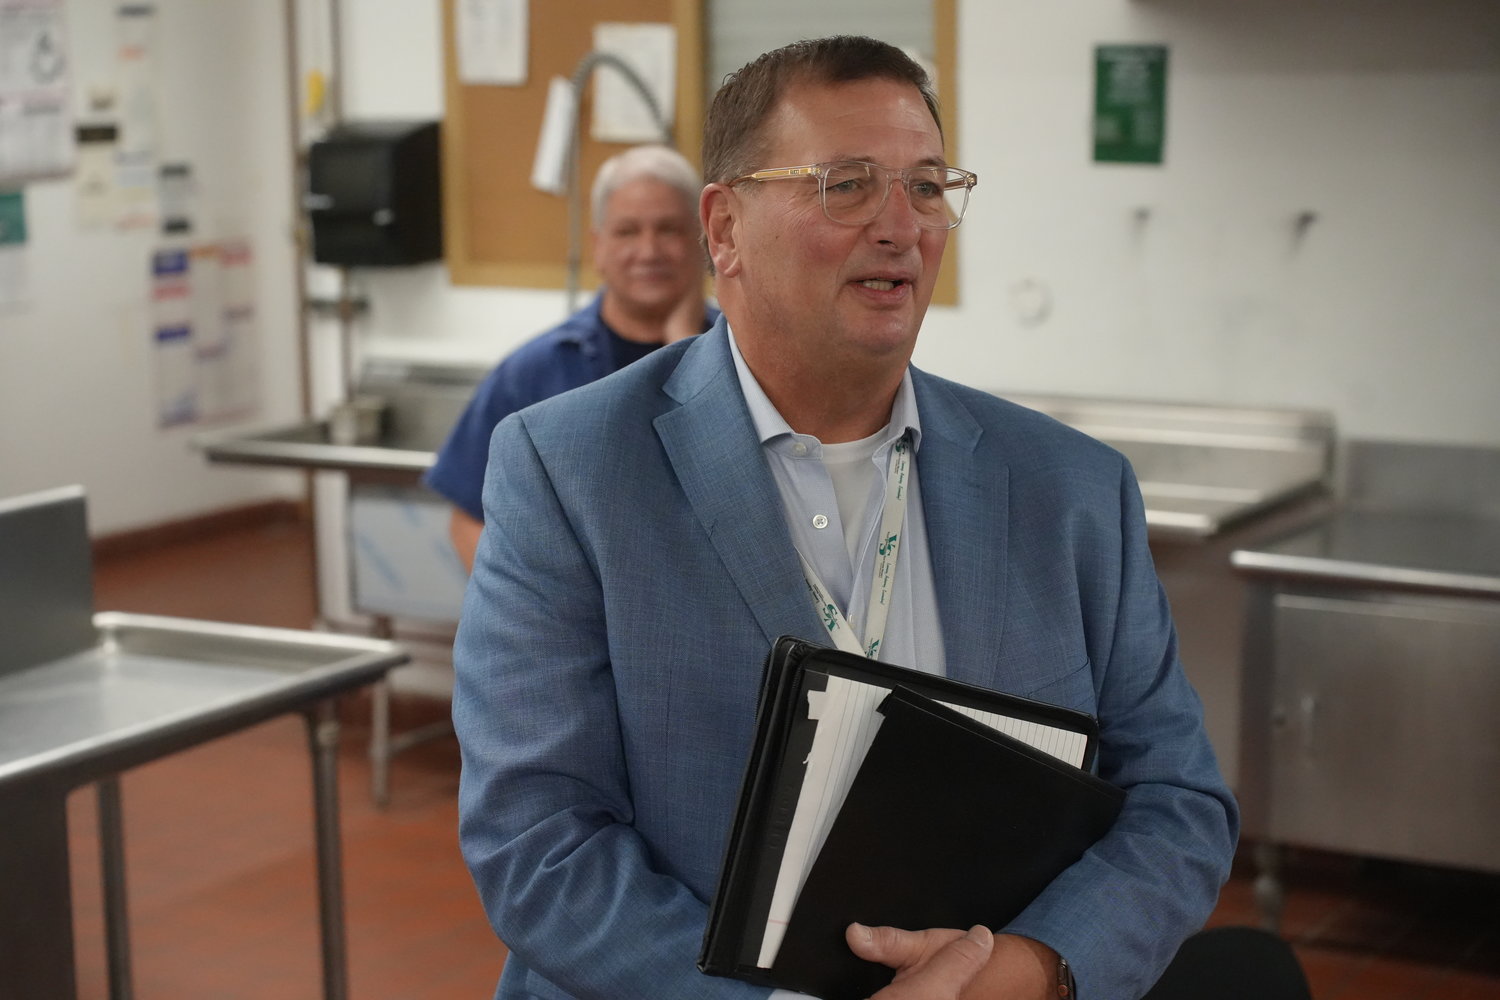 Valley Stream Central High School District Superintendent Wayne Loper unveiled the district’s $149 million budget for the 2023-24 school year.